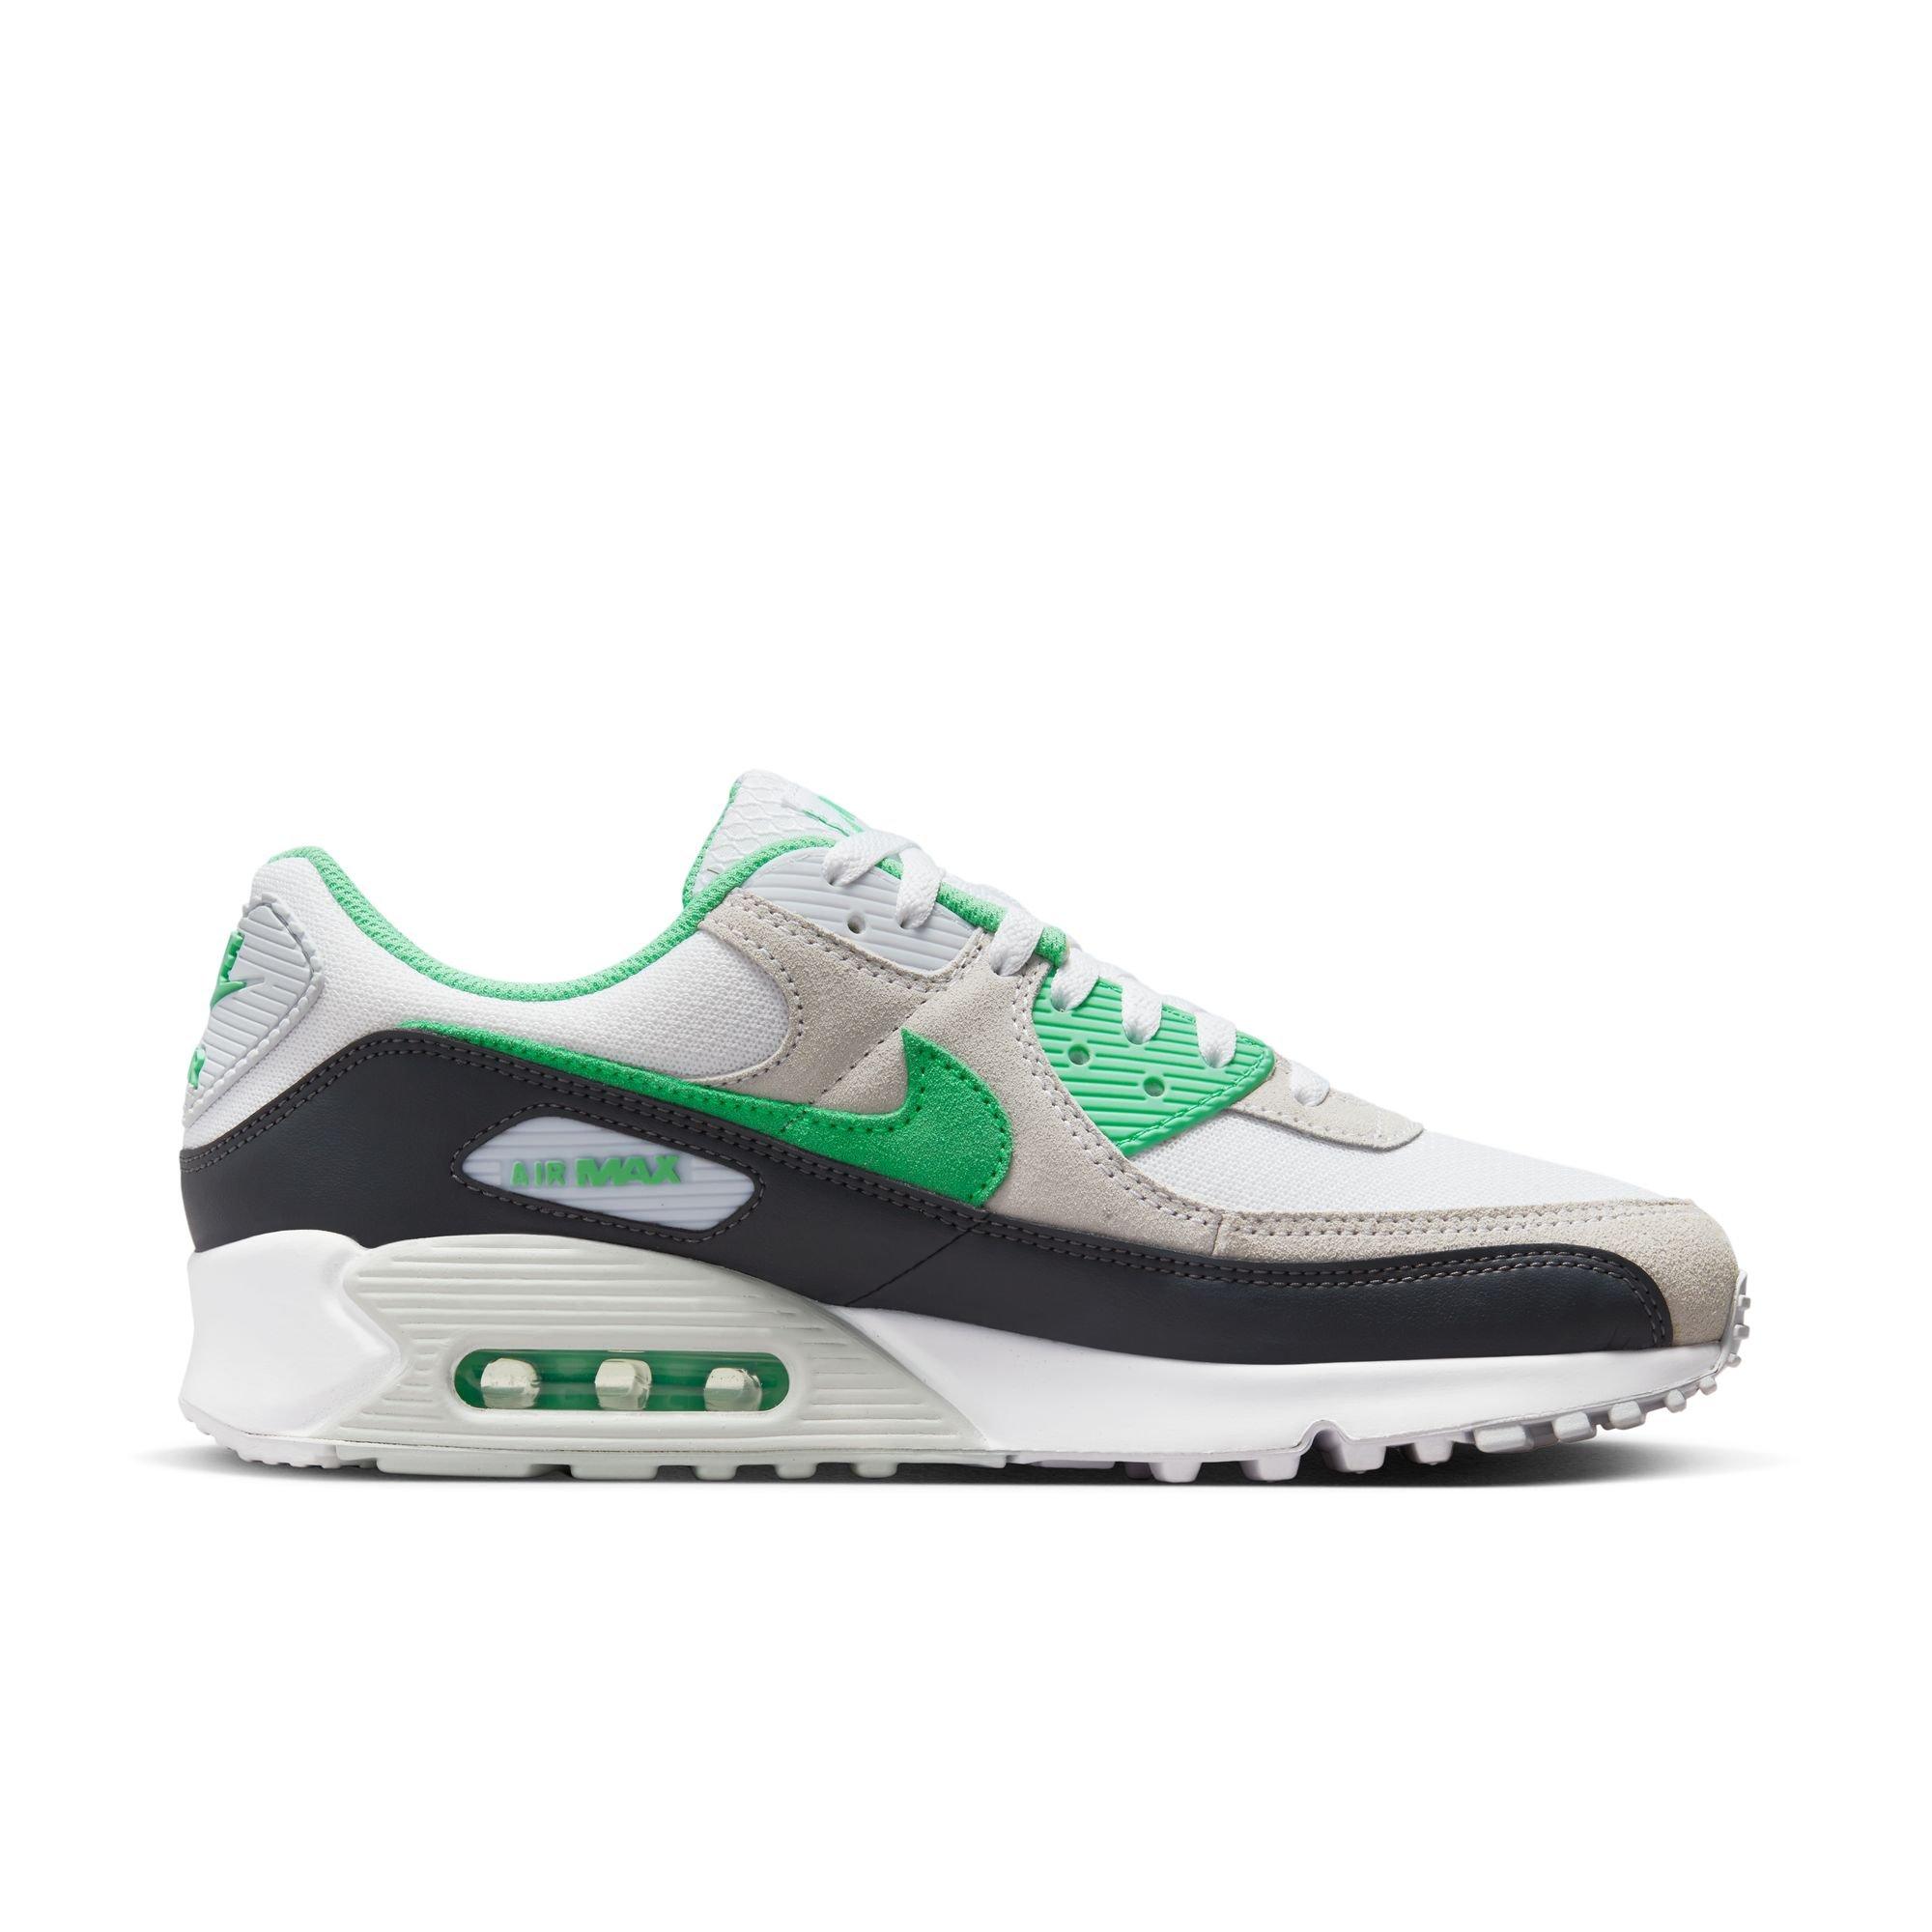 NIKE AIR MAX 90 'WHITE/SPRING GREEN-ANTHRACITE' ₹10,795, UK 7-11 Lace up  and feel the legacy. Produced at the intersection of art…